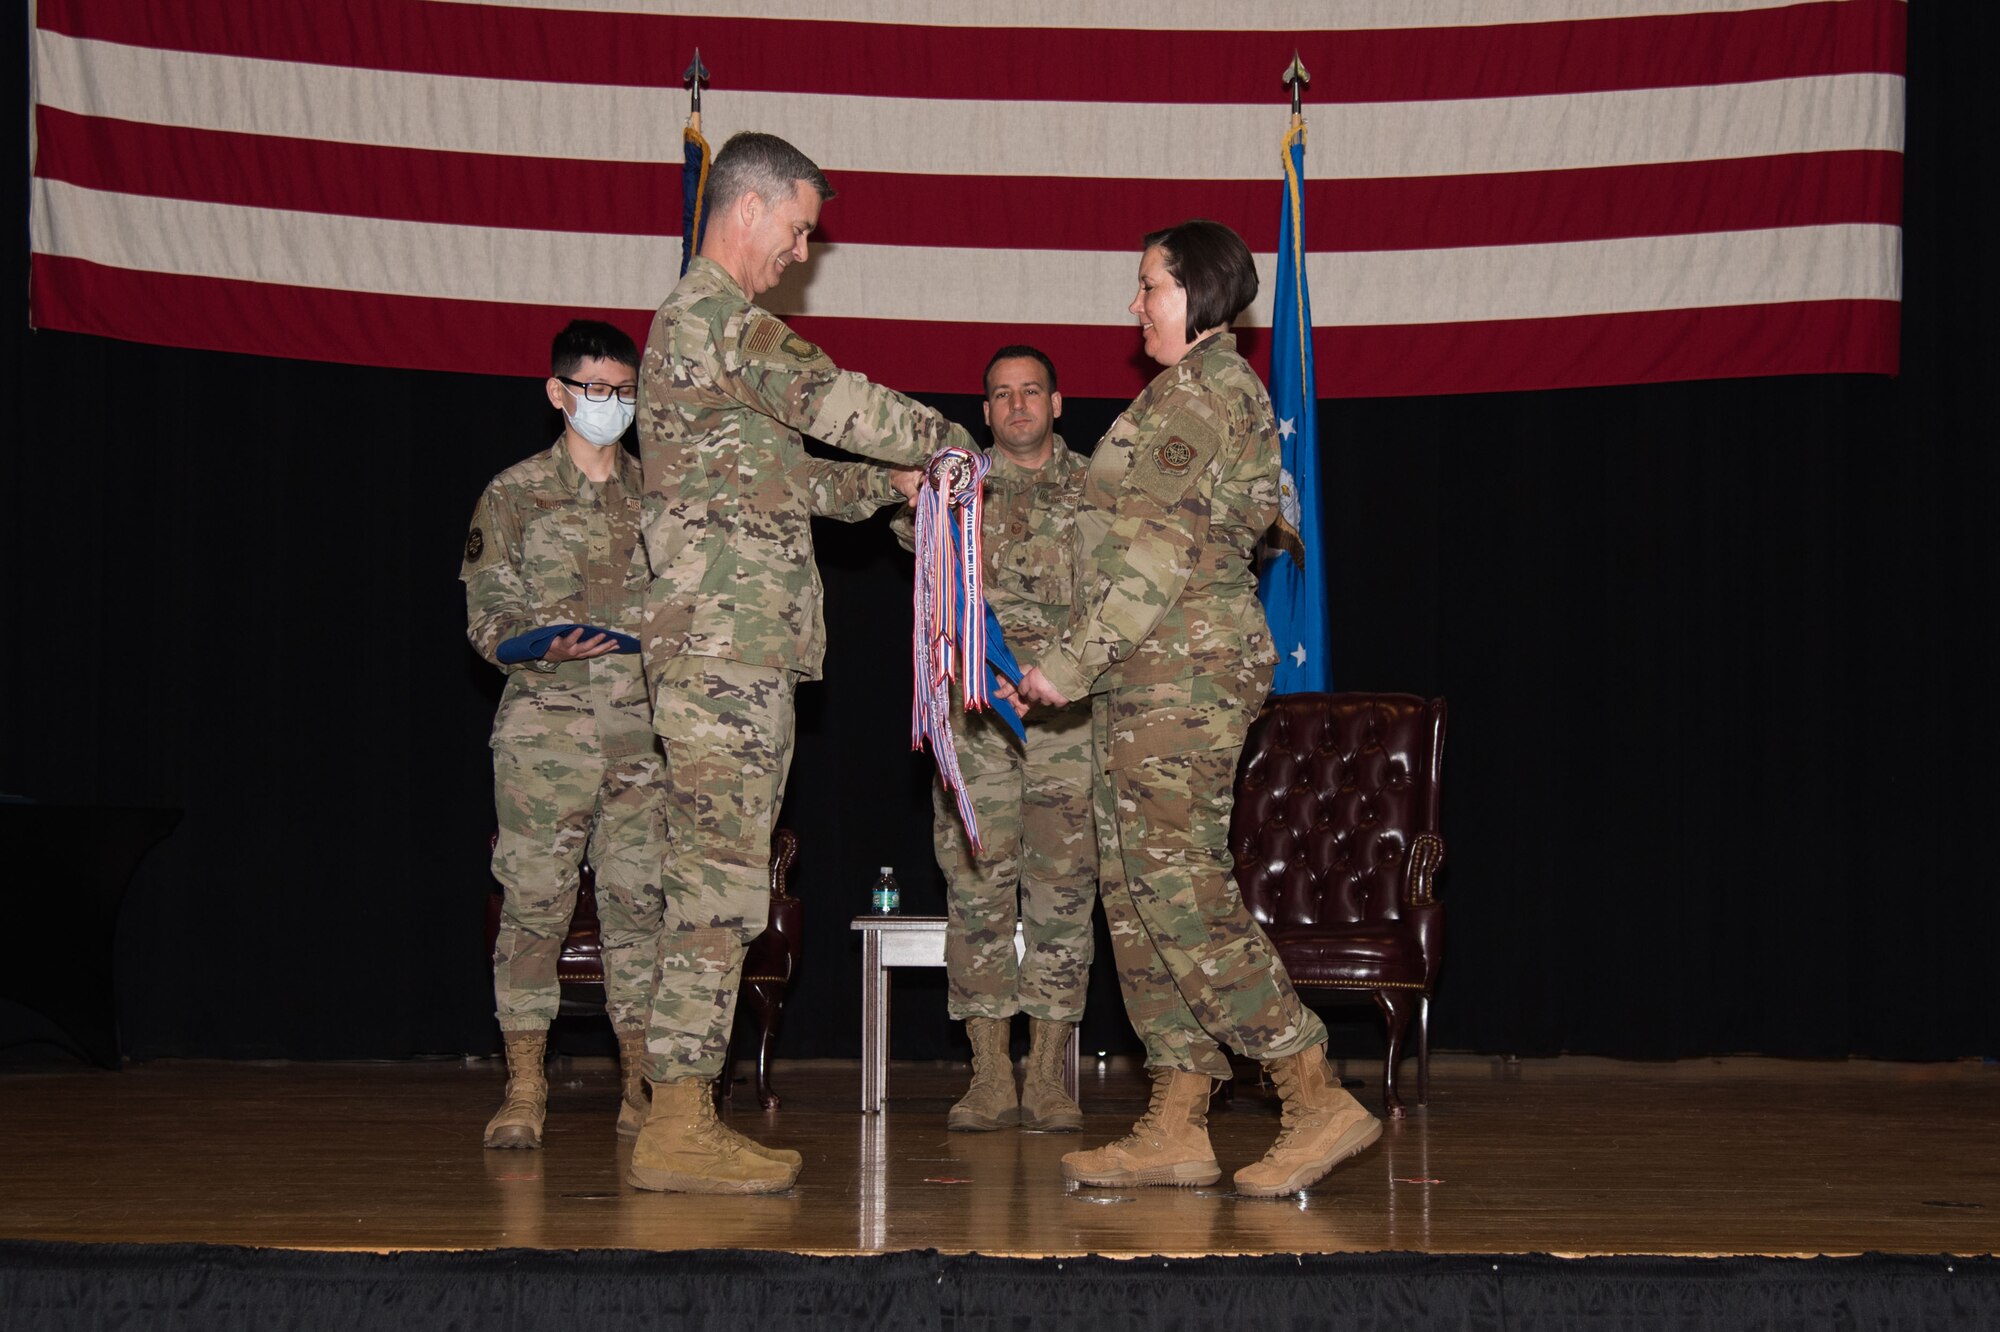 Col. Richard Tanner, 22nd Air Refueling Wing commander, left, and Lt. Col. Angela Yuhas, 22nd Medical Support Squadron outgoing commander, right, furl and case the 22d MDSS guidon June 16, 2021, at McConnell Air Force Base, Kansas. The 22d MDSS was constituted on Sept. 23, 1994, and activated on Oct. 1, 1994, on McConnell AFB. In-activation ceremonies are held in order to merge the squadron with the other units. (U.S. Air Force photo by Senior Airman Alexi Bosarge)